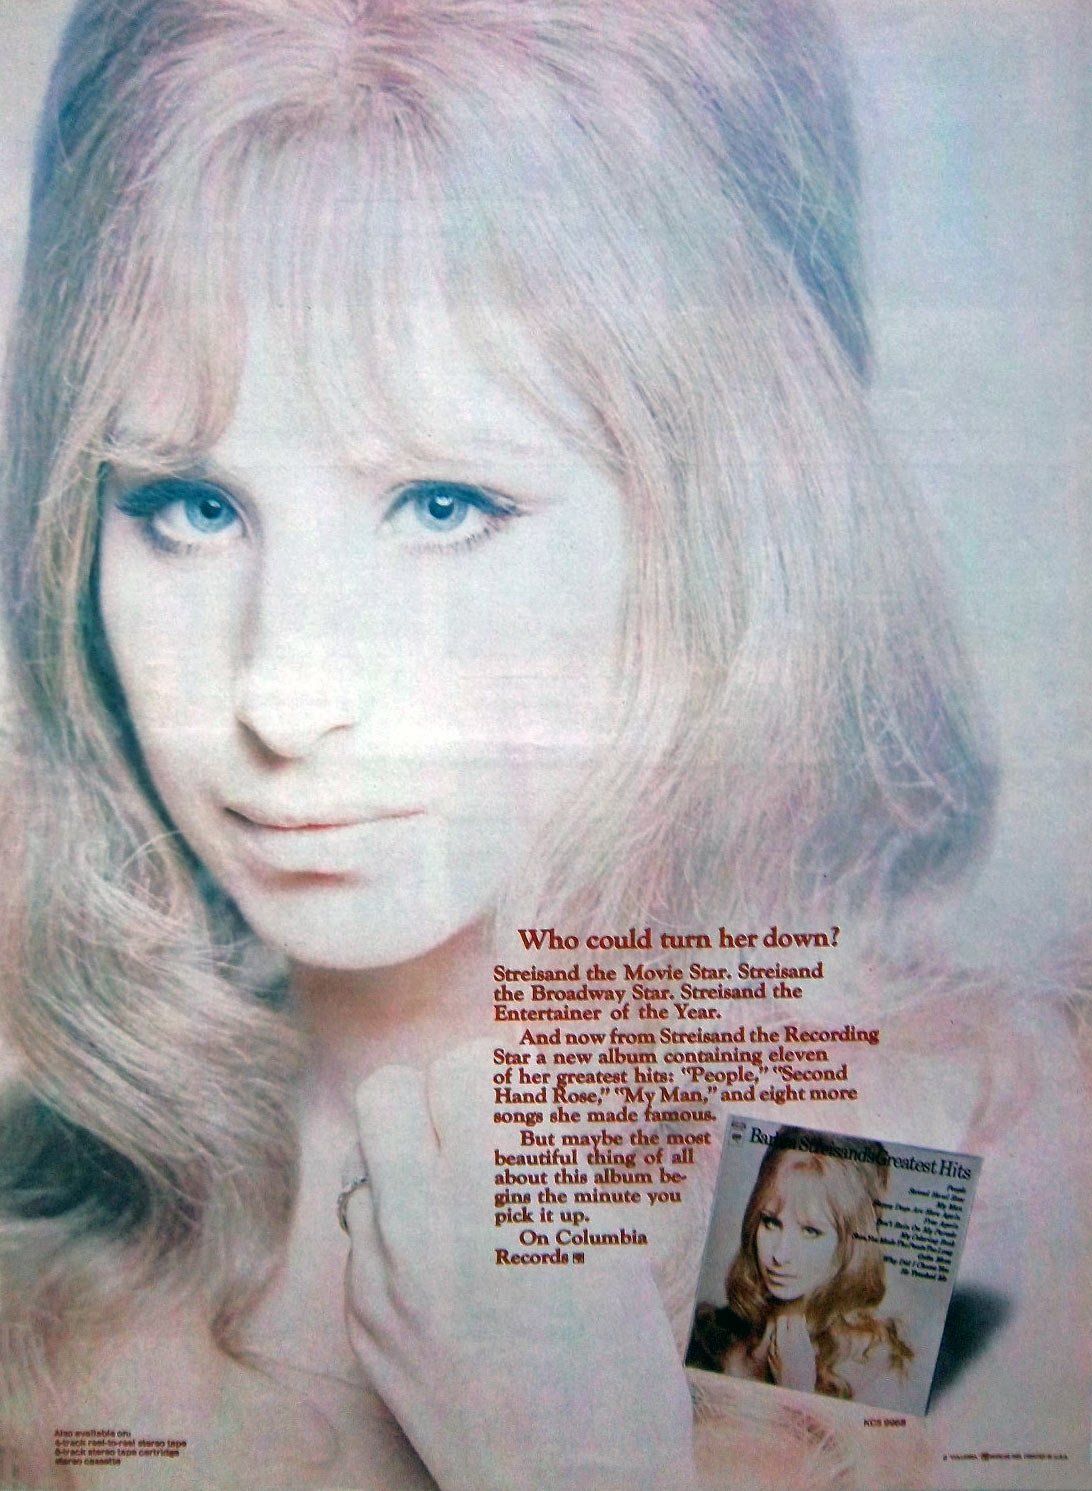 Columbia Records color ad for Barbra Streisand's Greatest Hits album.